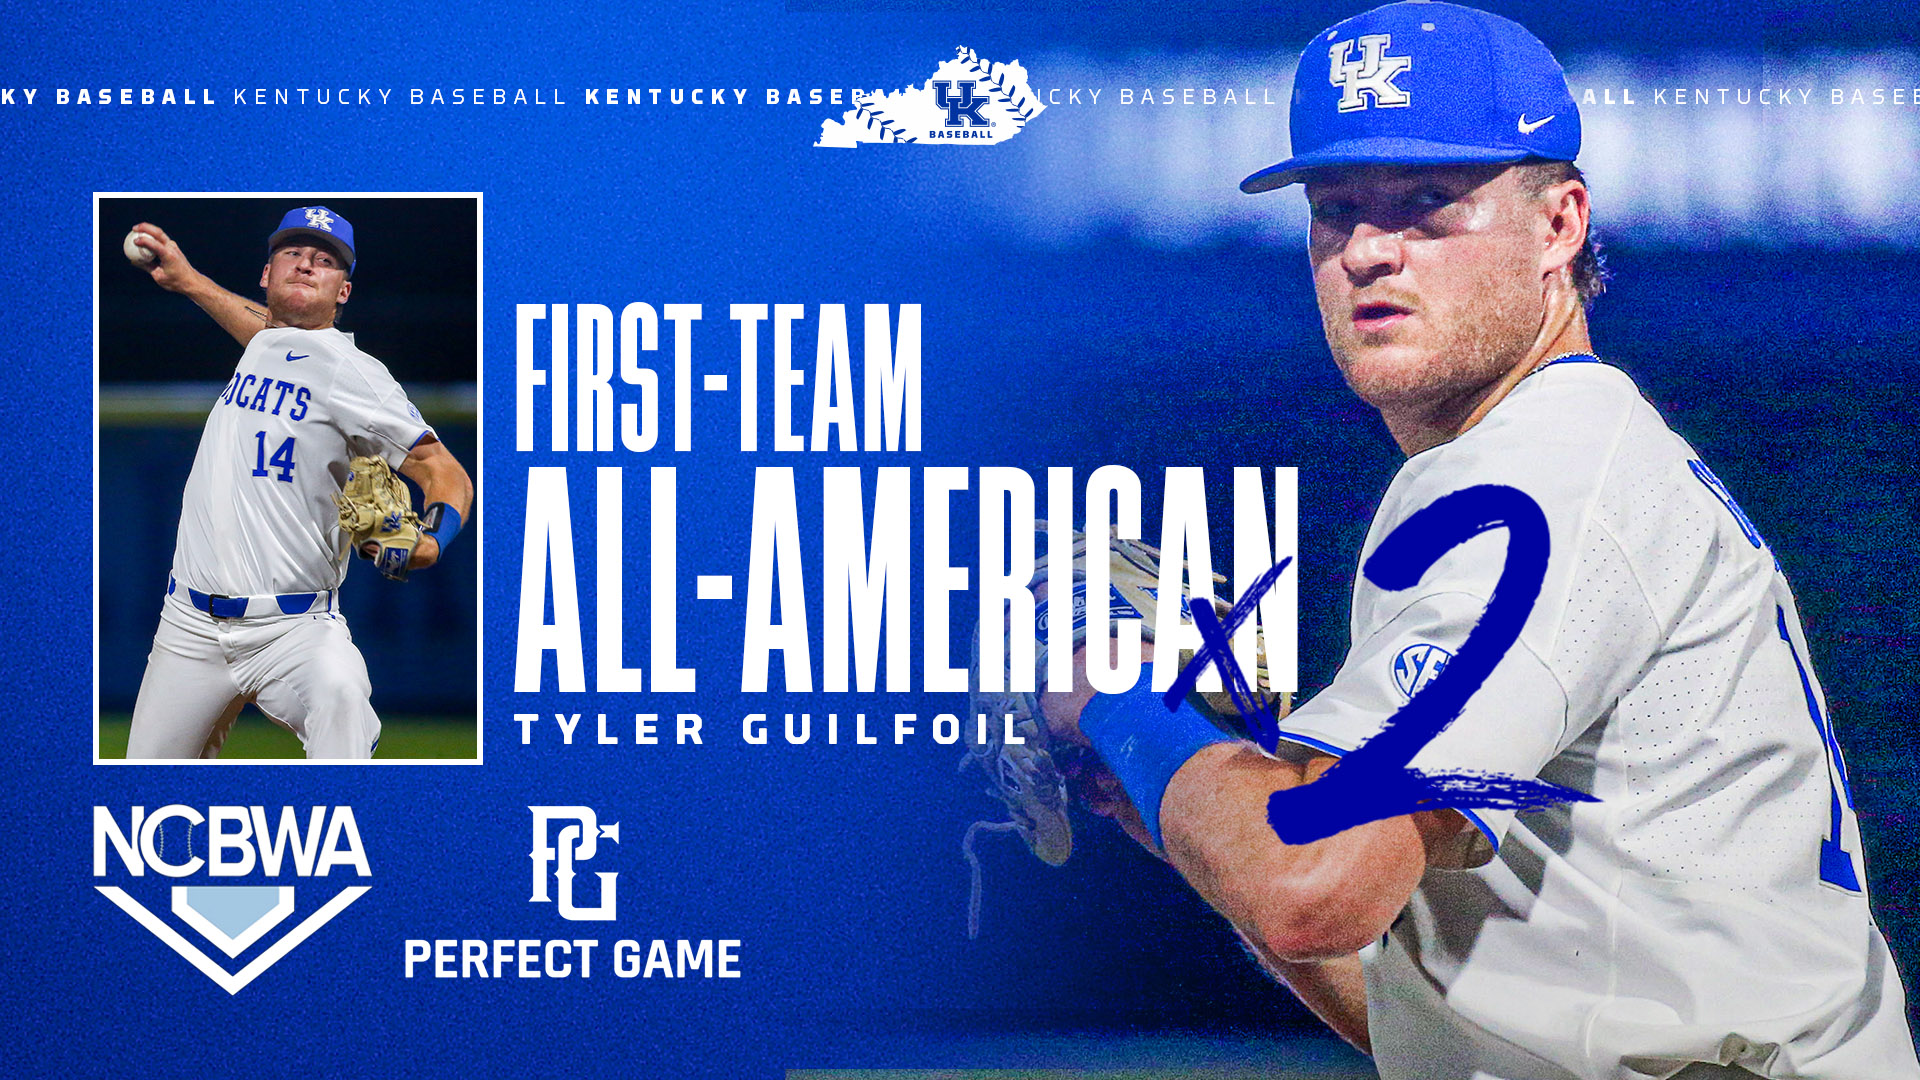 Guilfoil Voted NCBWA, Perfect Game First-Team All-America